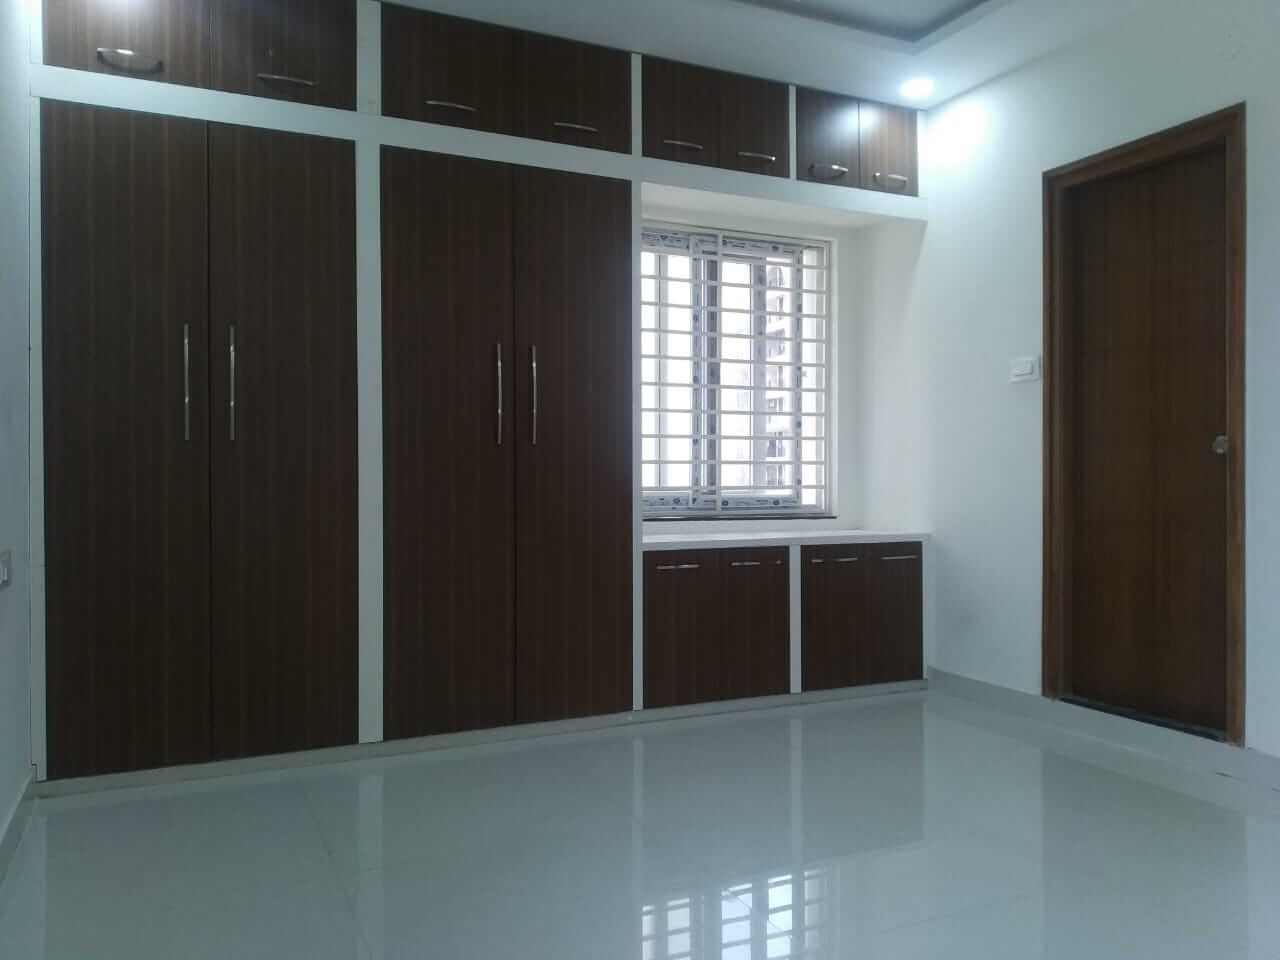 3 bhk east facing flat with all basic amenities like water, lift, power back up etc, 1530 sqft on 5th floor